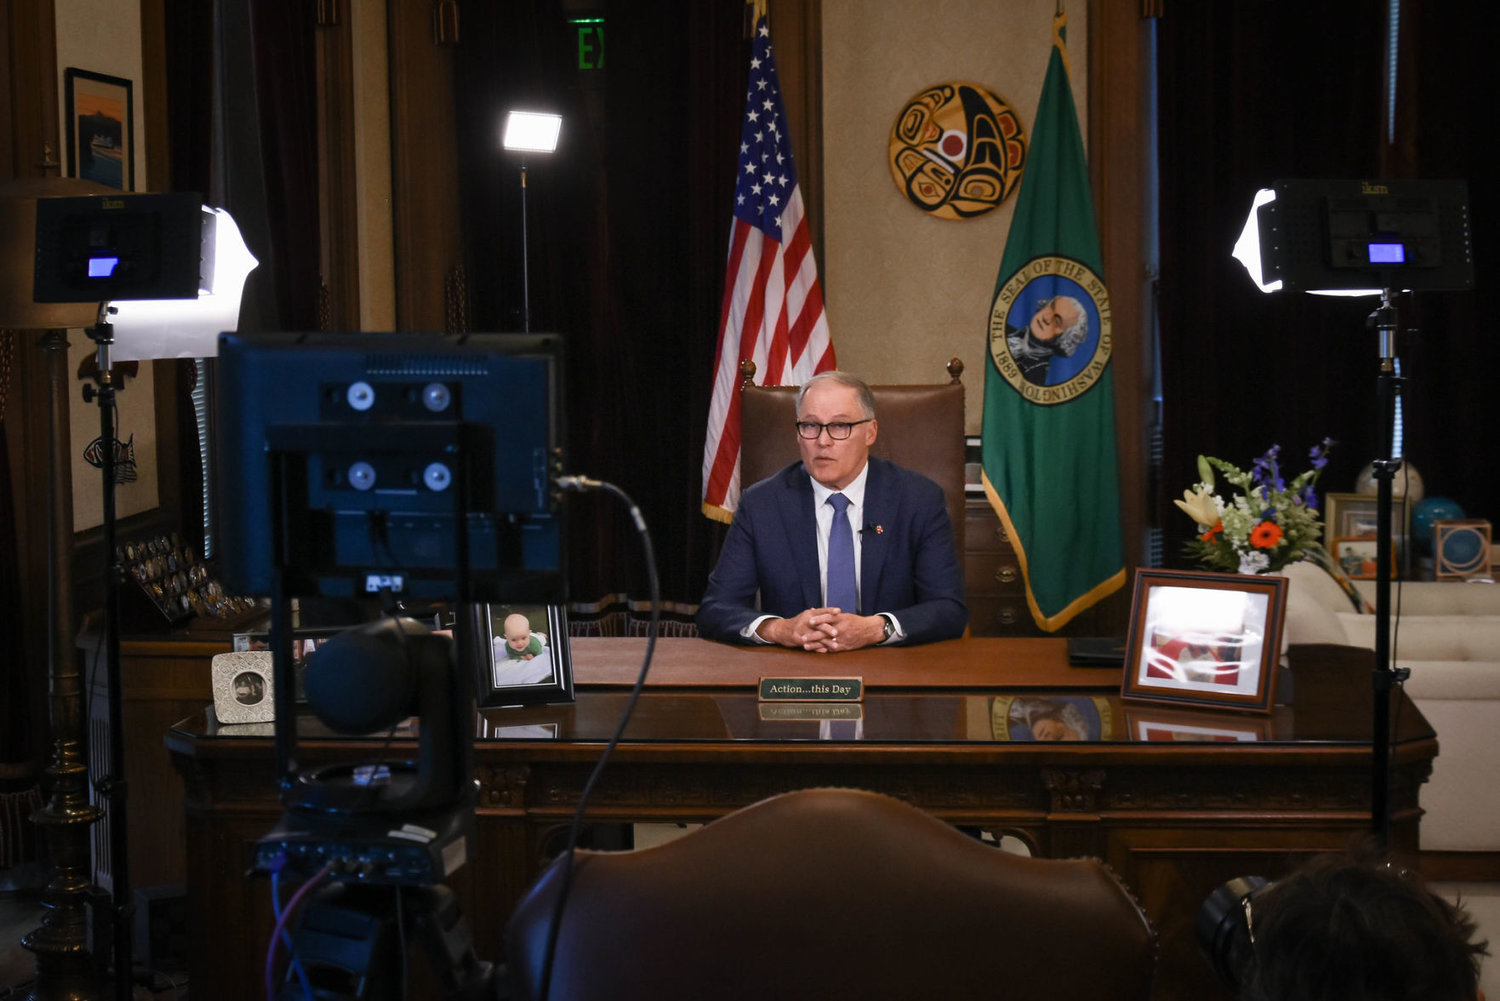 Gov. Jay Inslee delivers an address from his office during the early stages of the COVID-19 pandemic in 2020. This photo was provided by the governor’s office.